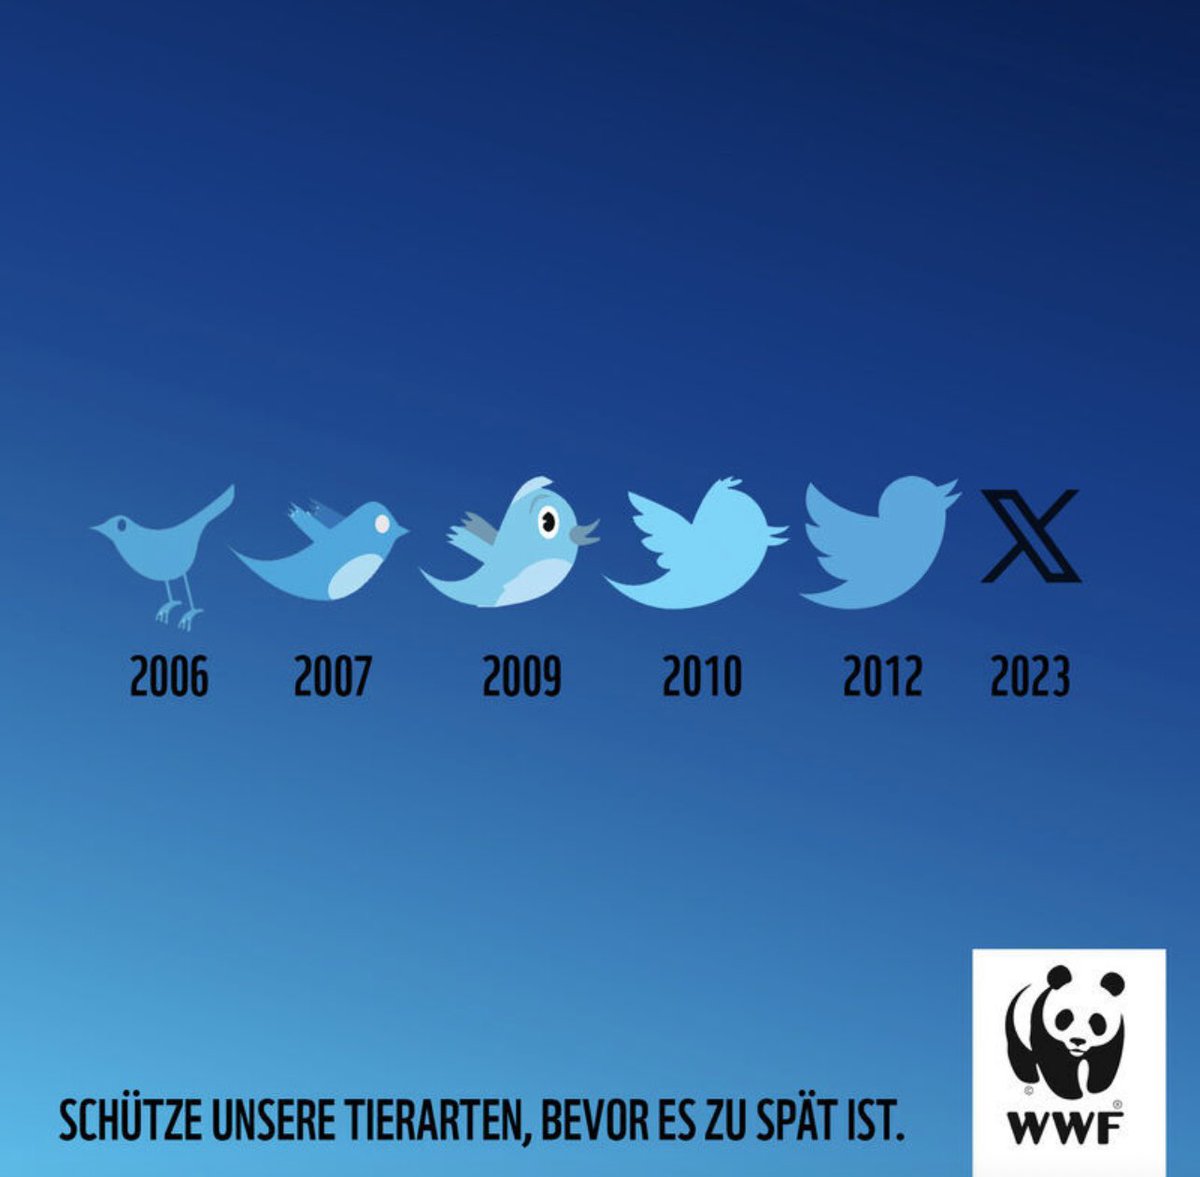 Beautiful (and simple) idea from WWF Germany. Credit to McCann Germany. Copy reads: “Protect our wildlife, before it’s too late.” @WWF